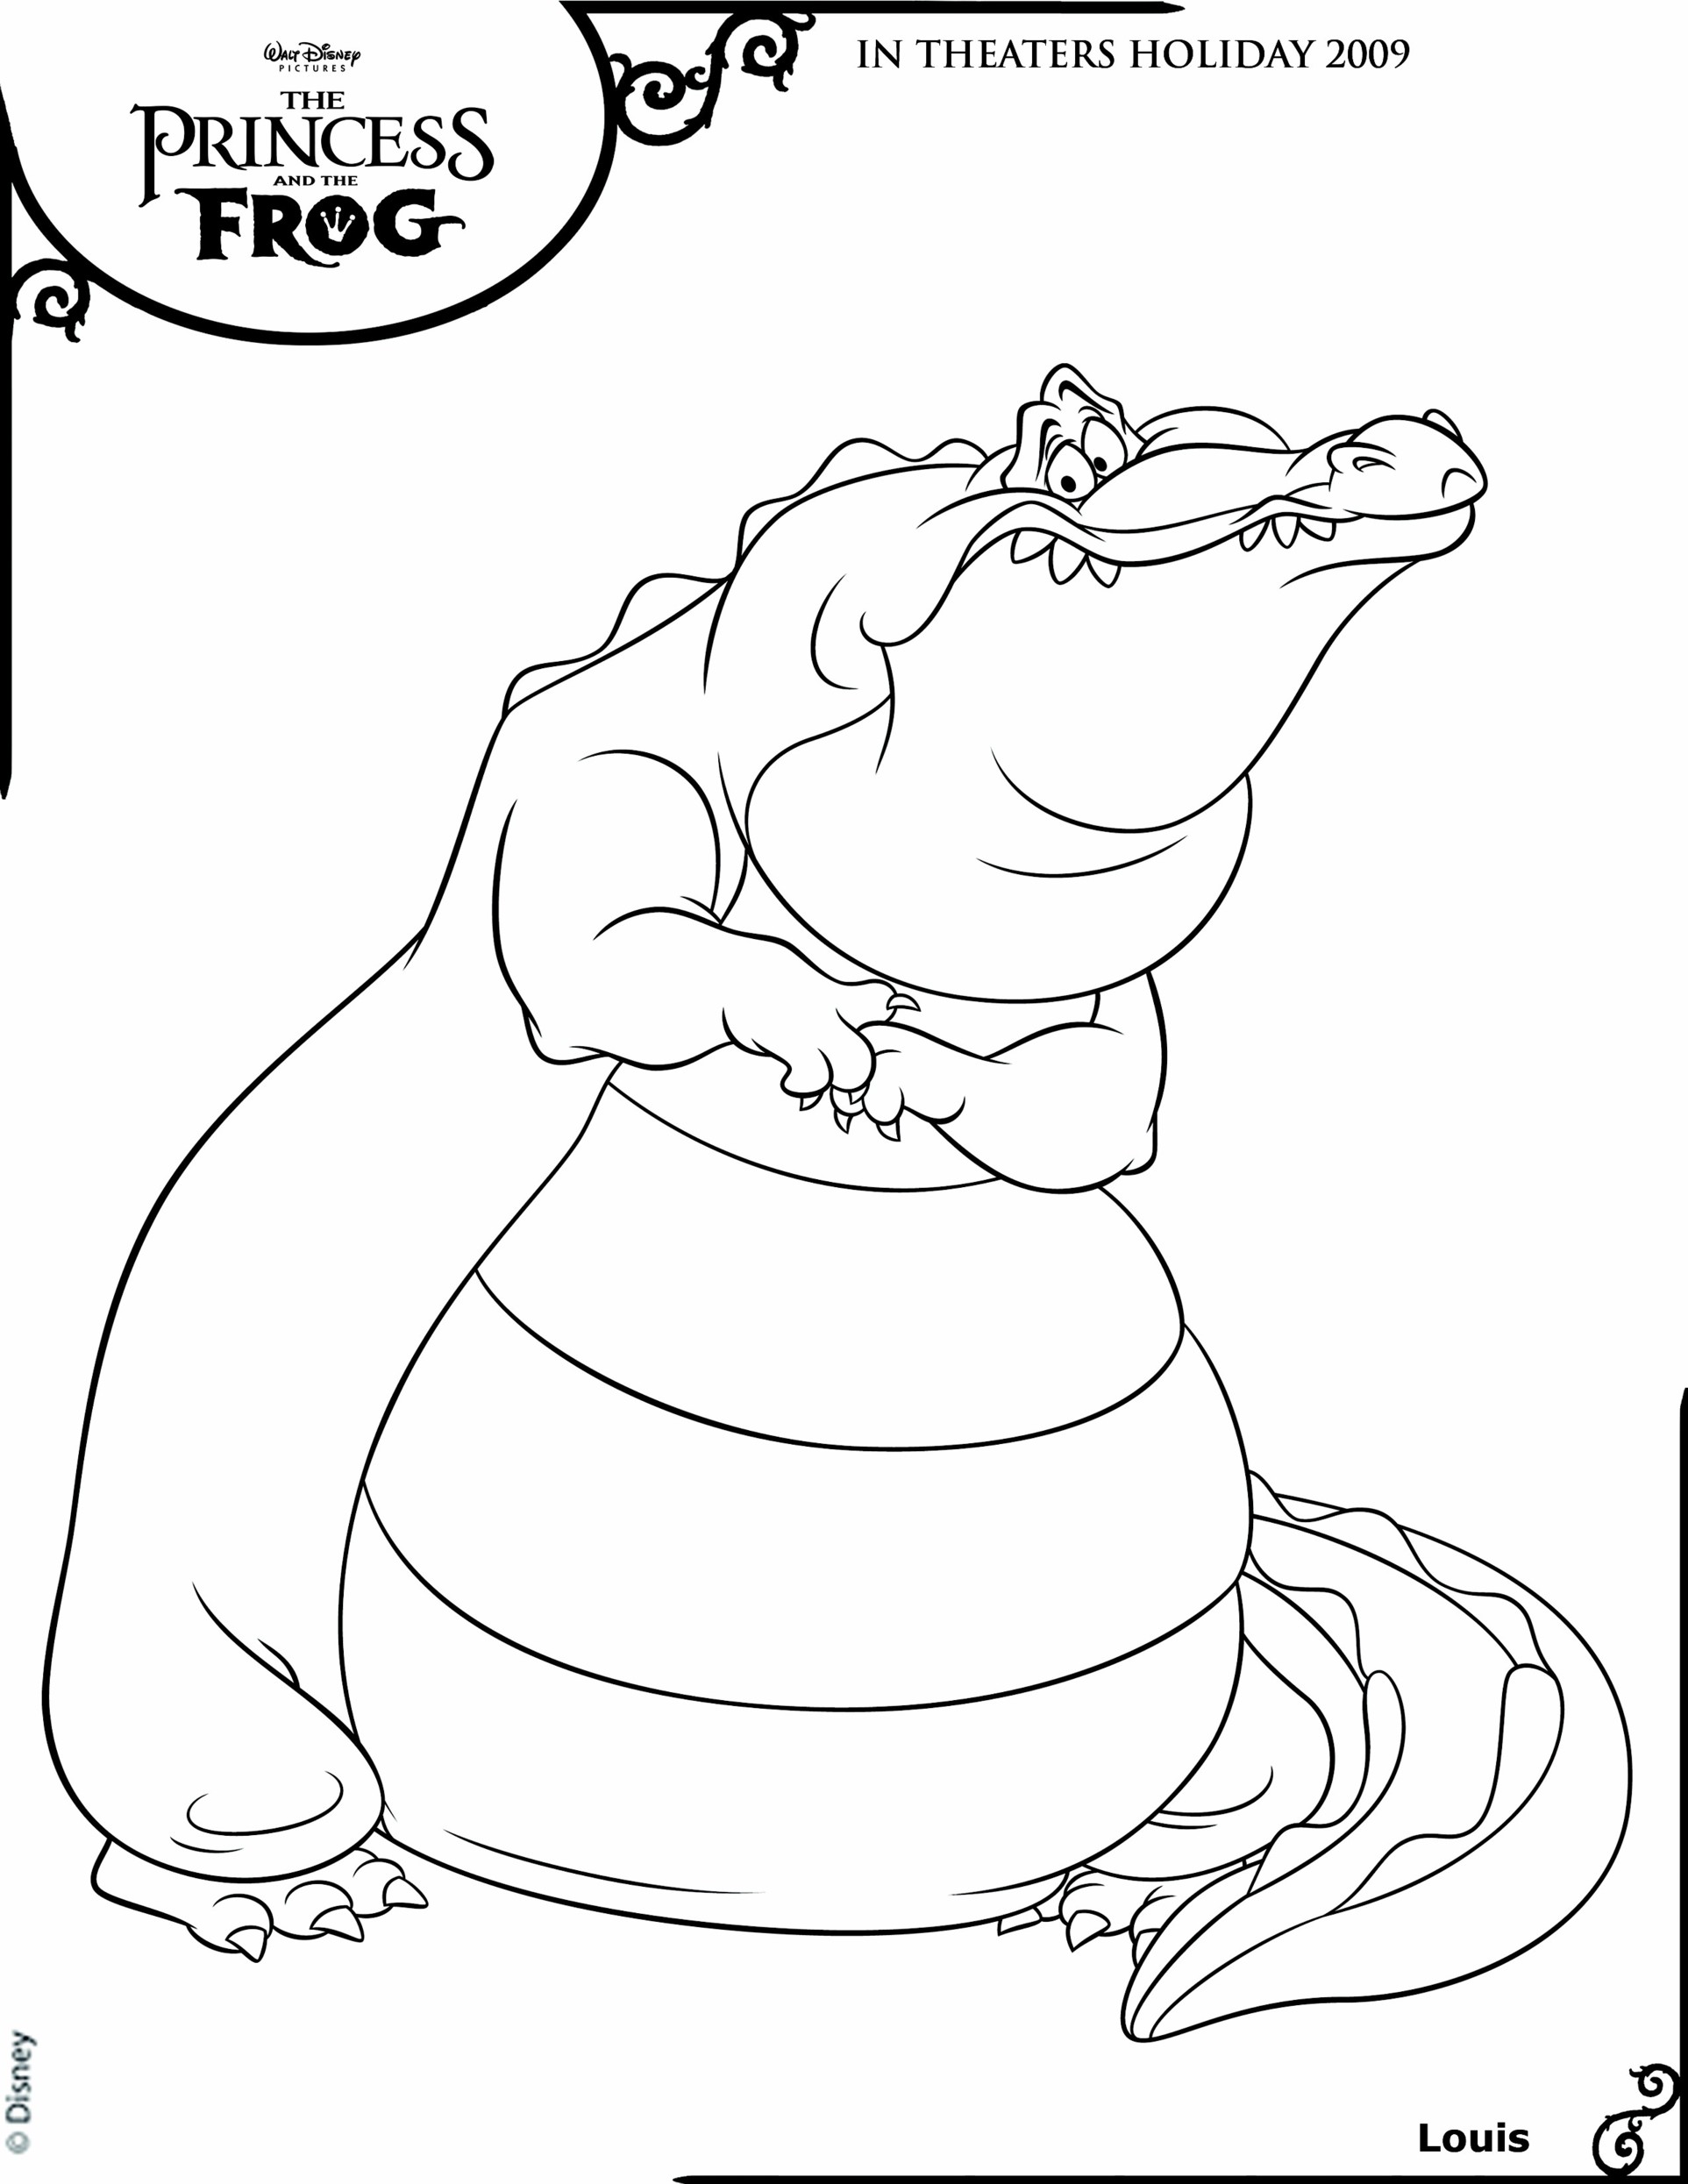 Coloring page: Alligator (Animals) #430 - Free Printable Coloring Pages